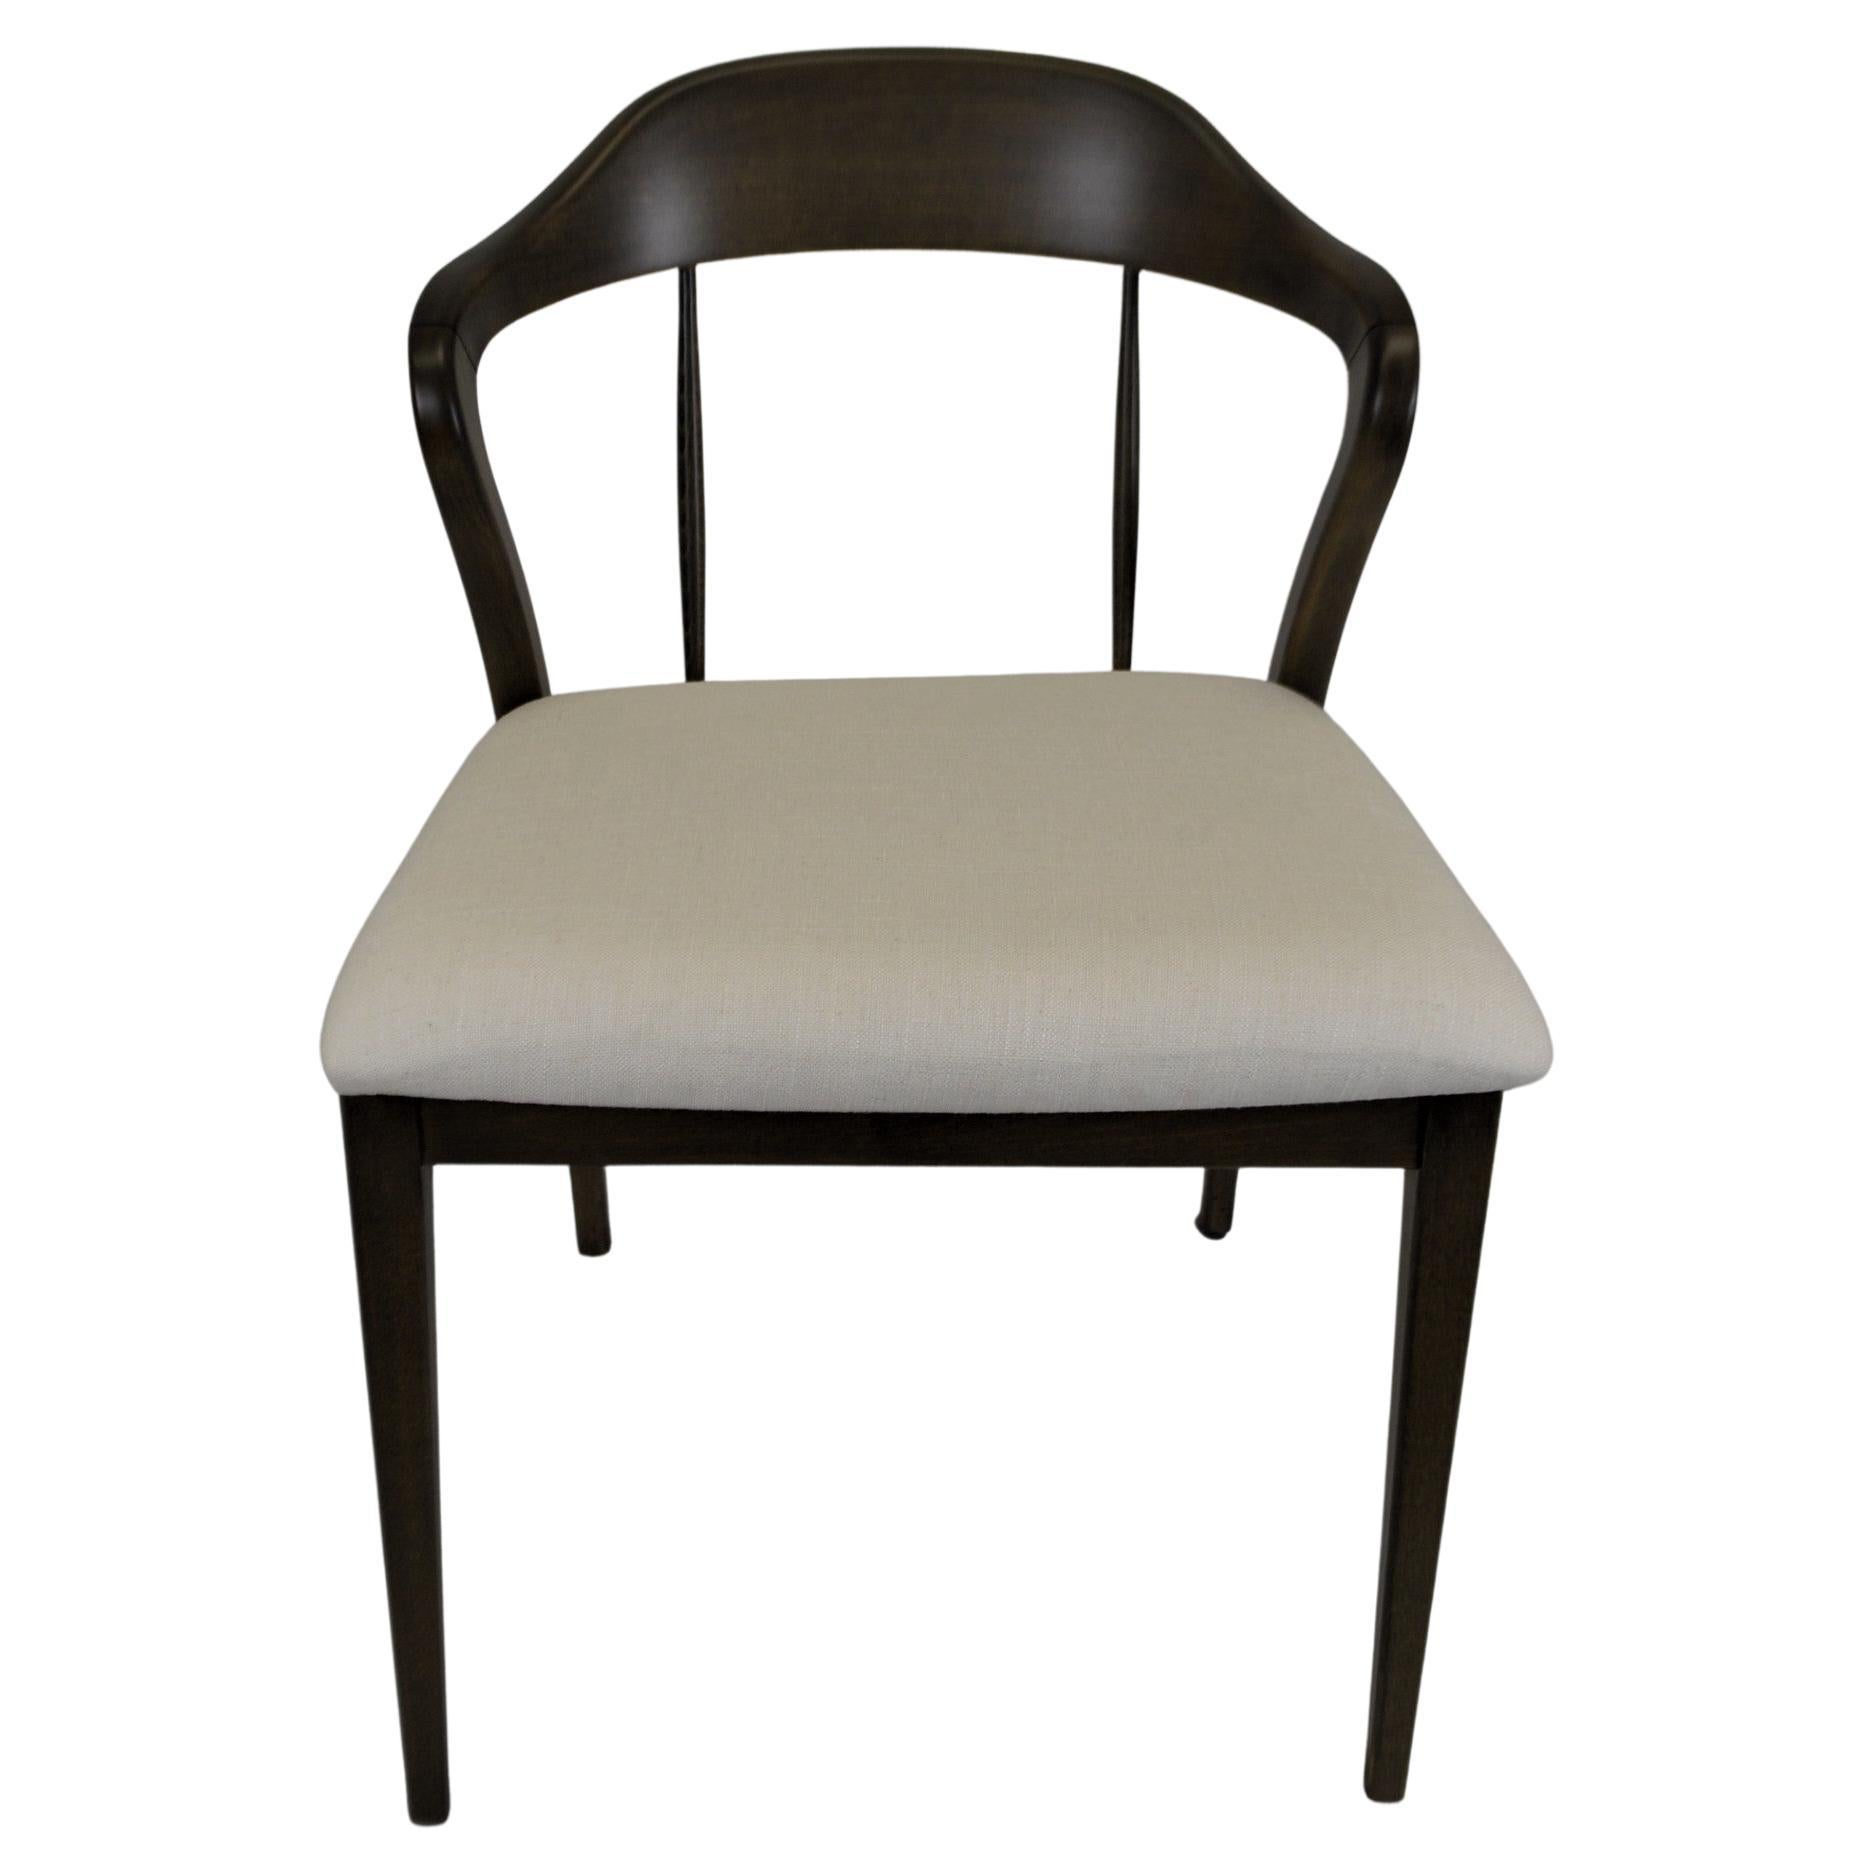 Contemporary Dining Chair Made in Italy for Custom Finish